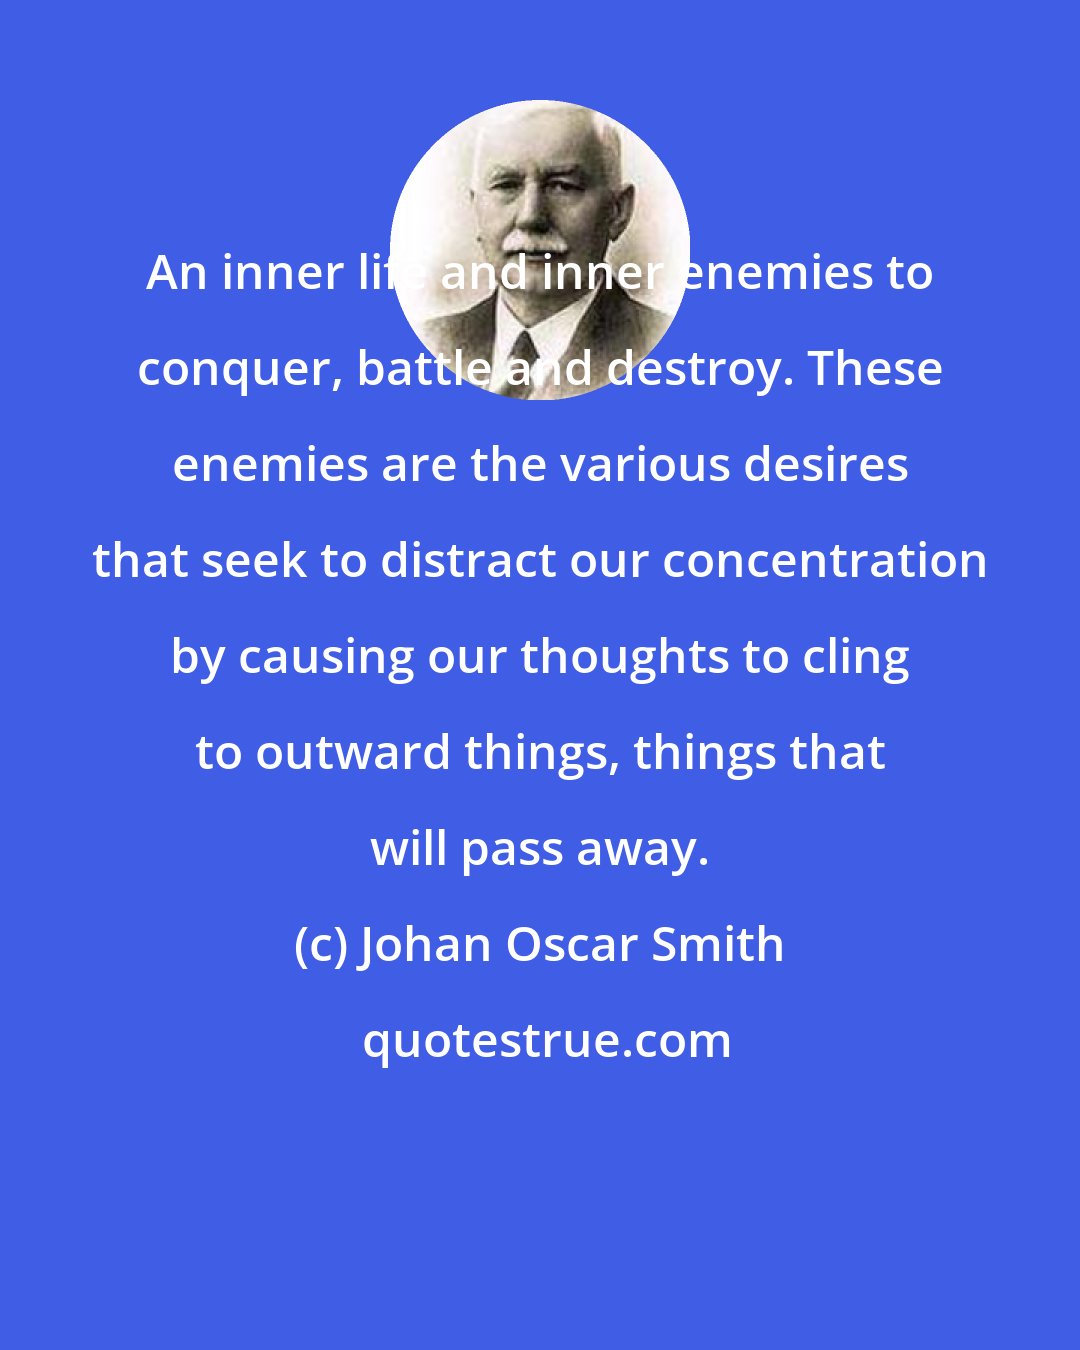 Johan Oscar Smith: An inner life and inner enemies to conquer, battle and destroy. These enemies are the various desires that seek to distract our concentration by causing our thoughts to cling to outward things, things that will pass away.